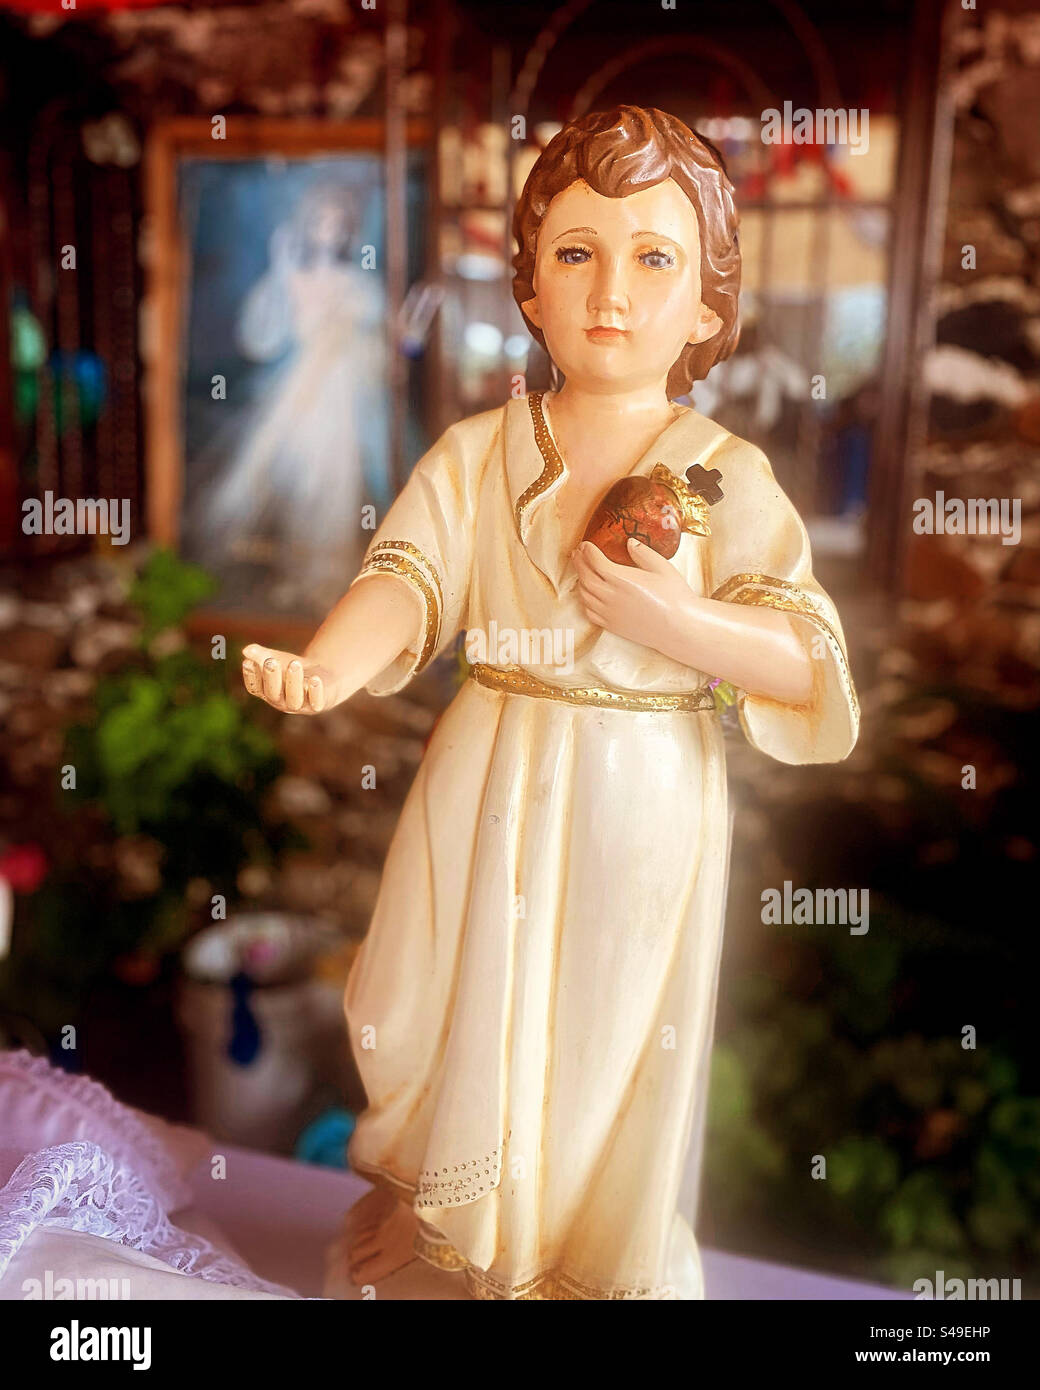 A sculpture of a Baby Jesus holding the Sacred Heart in front of an image of Jesus de la Misericordia in the Capilla de Santiago or Saint James chappel in Colon, Queretaro, Mexico Stock Photo